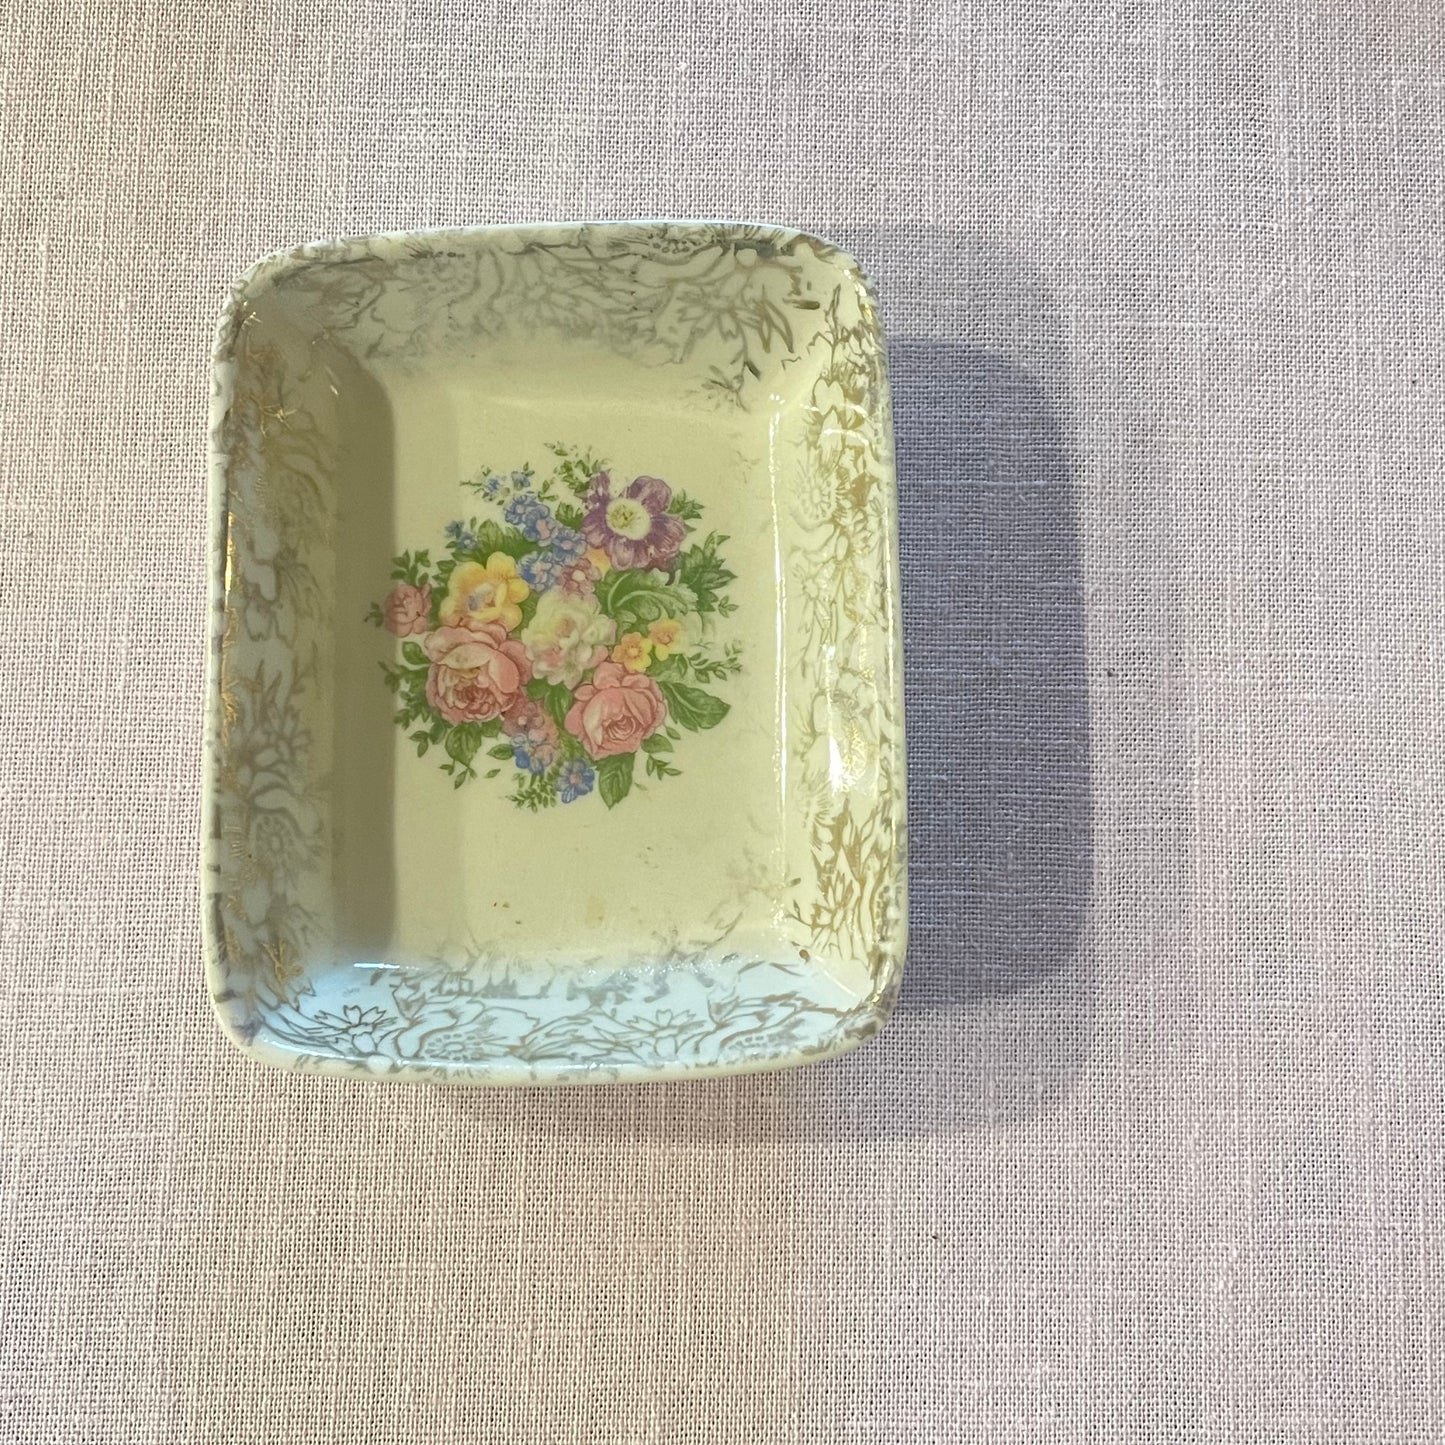 Vintage Trinket and Ring Dishes